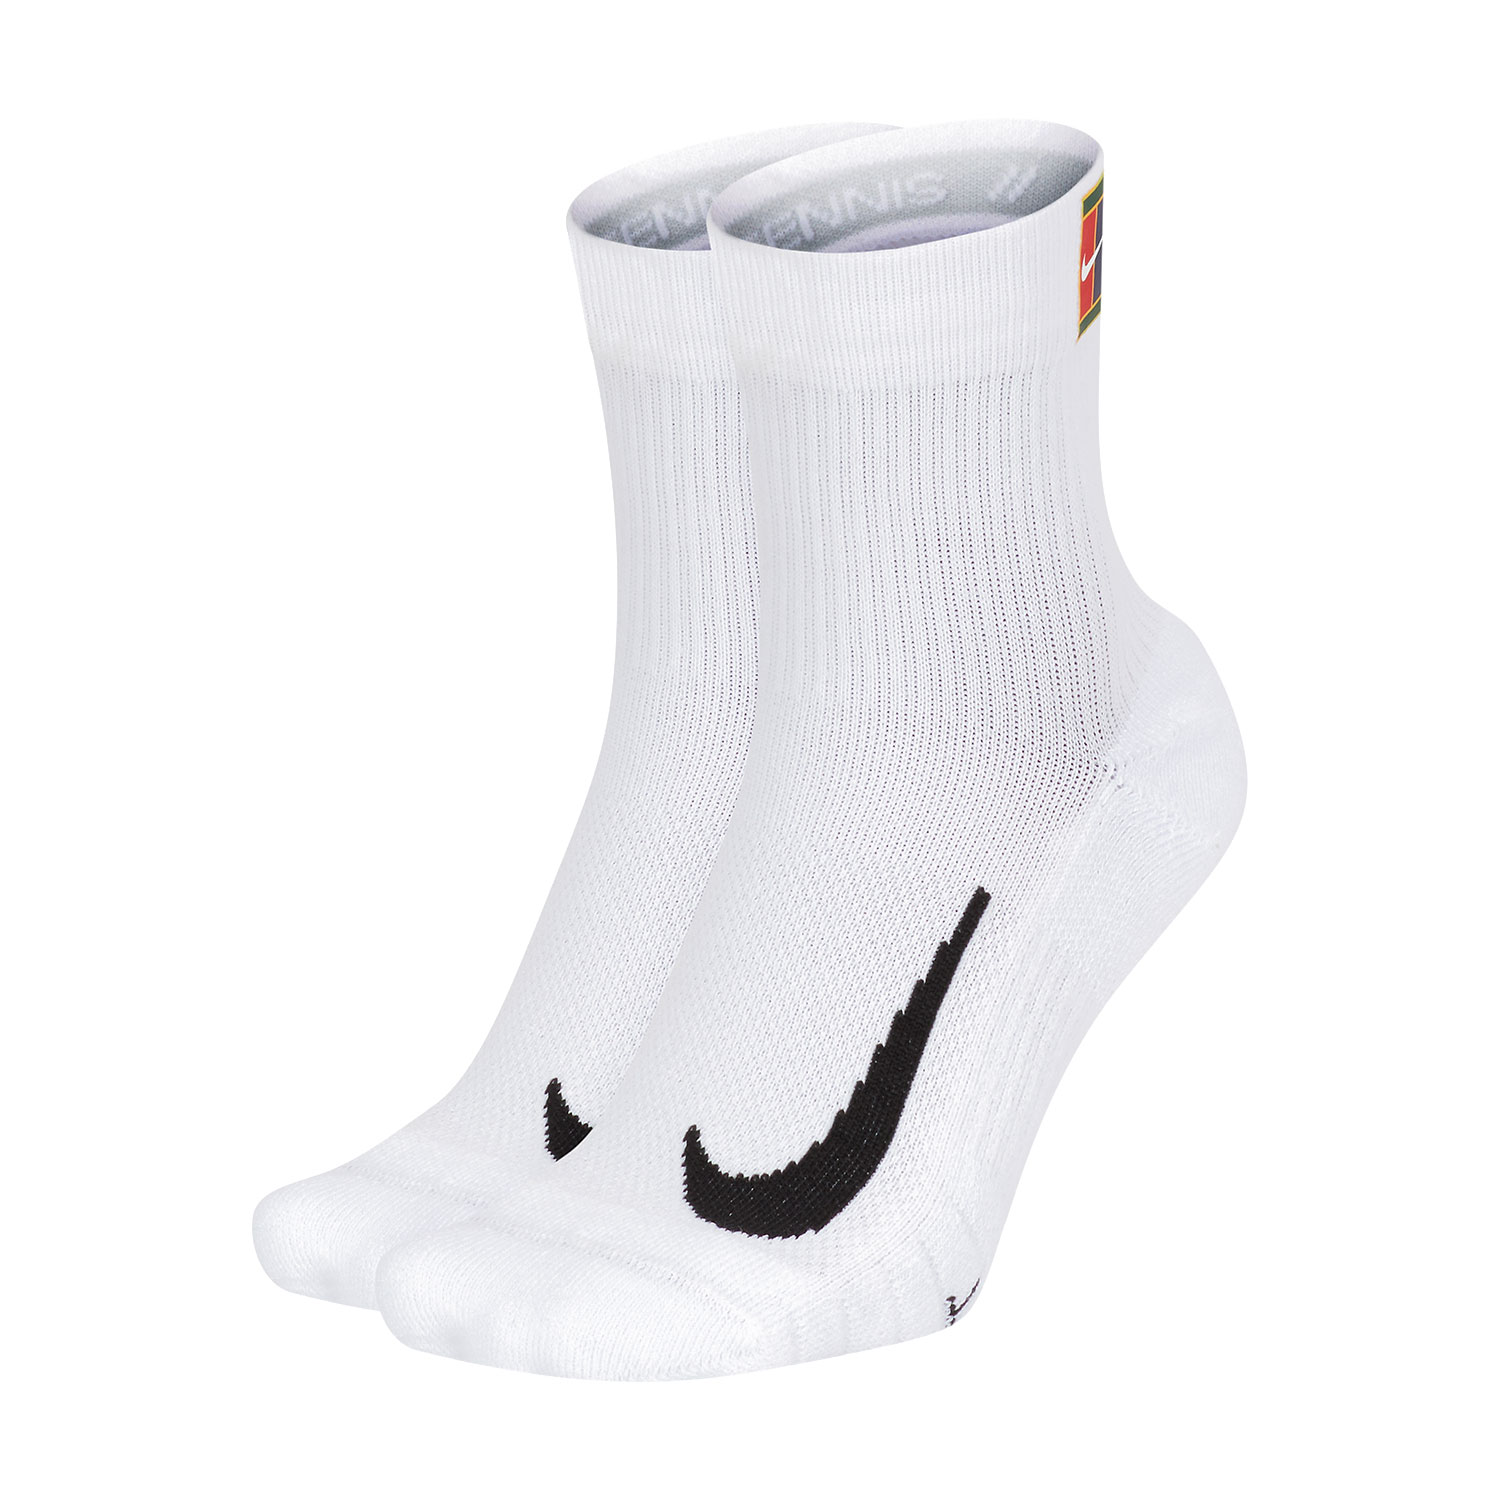 Nike Multiplier Max x 2 Calcetines - White